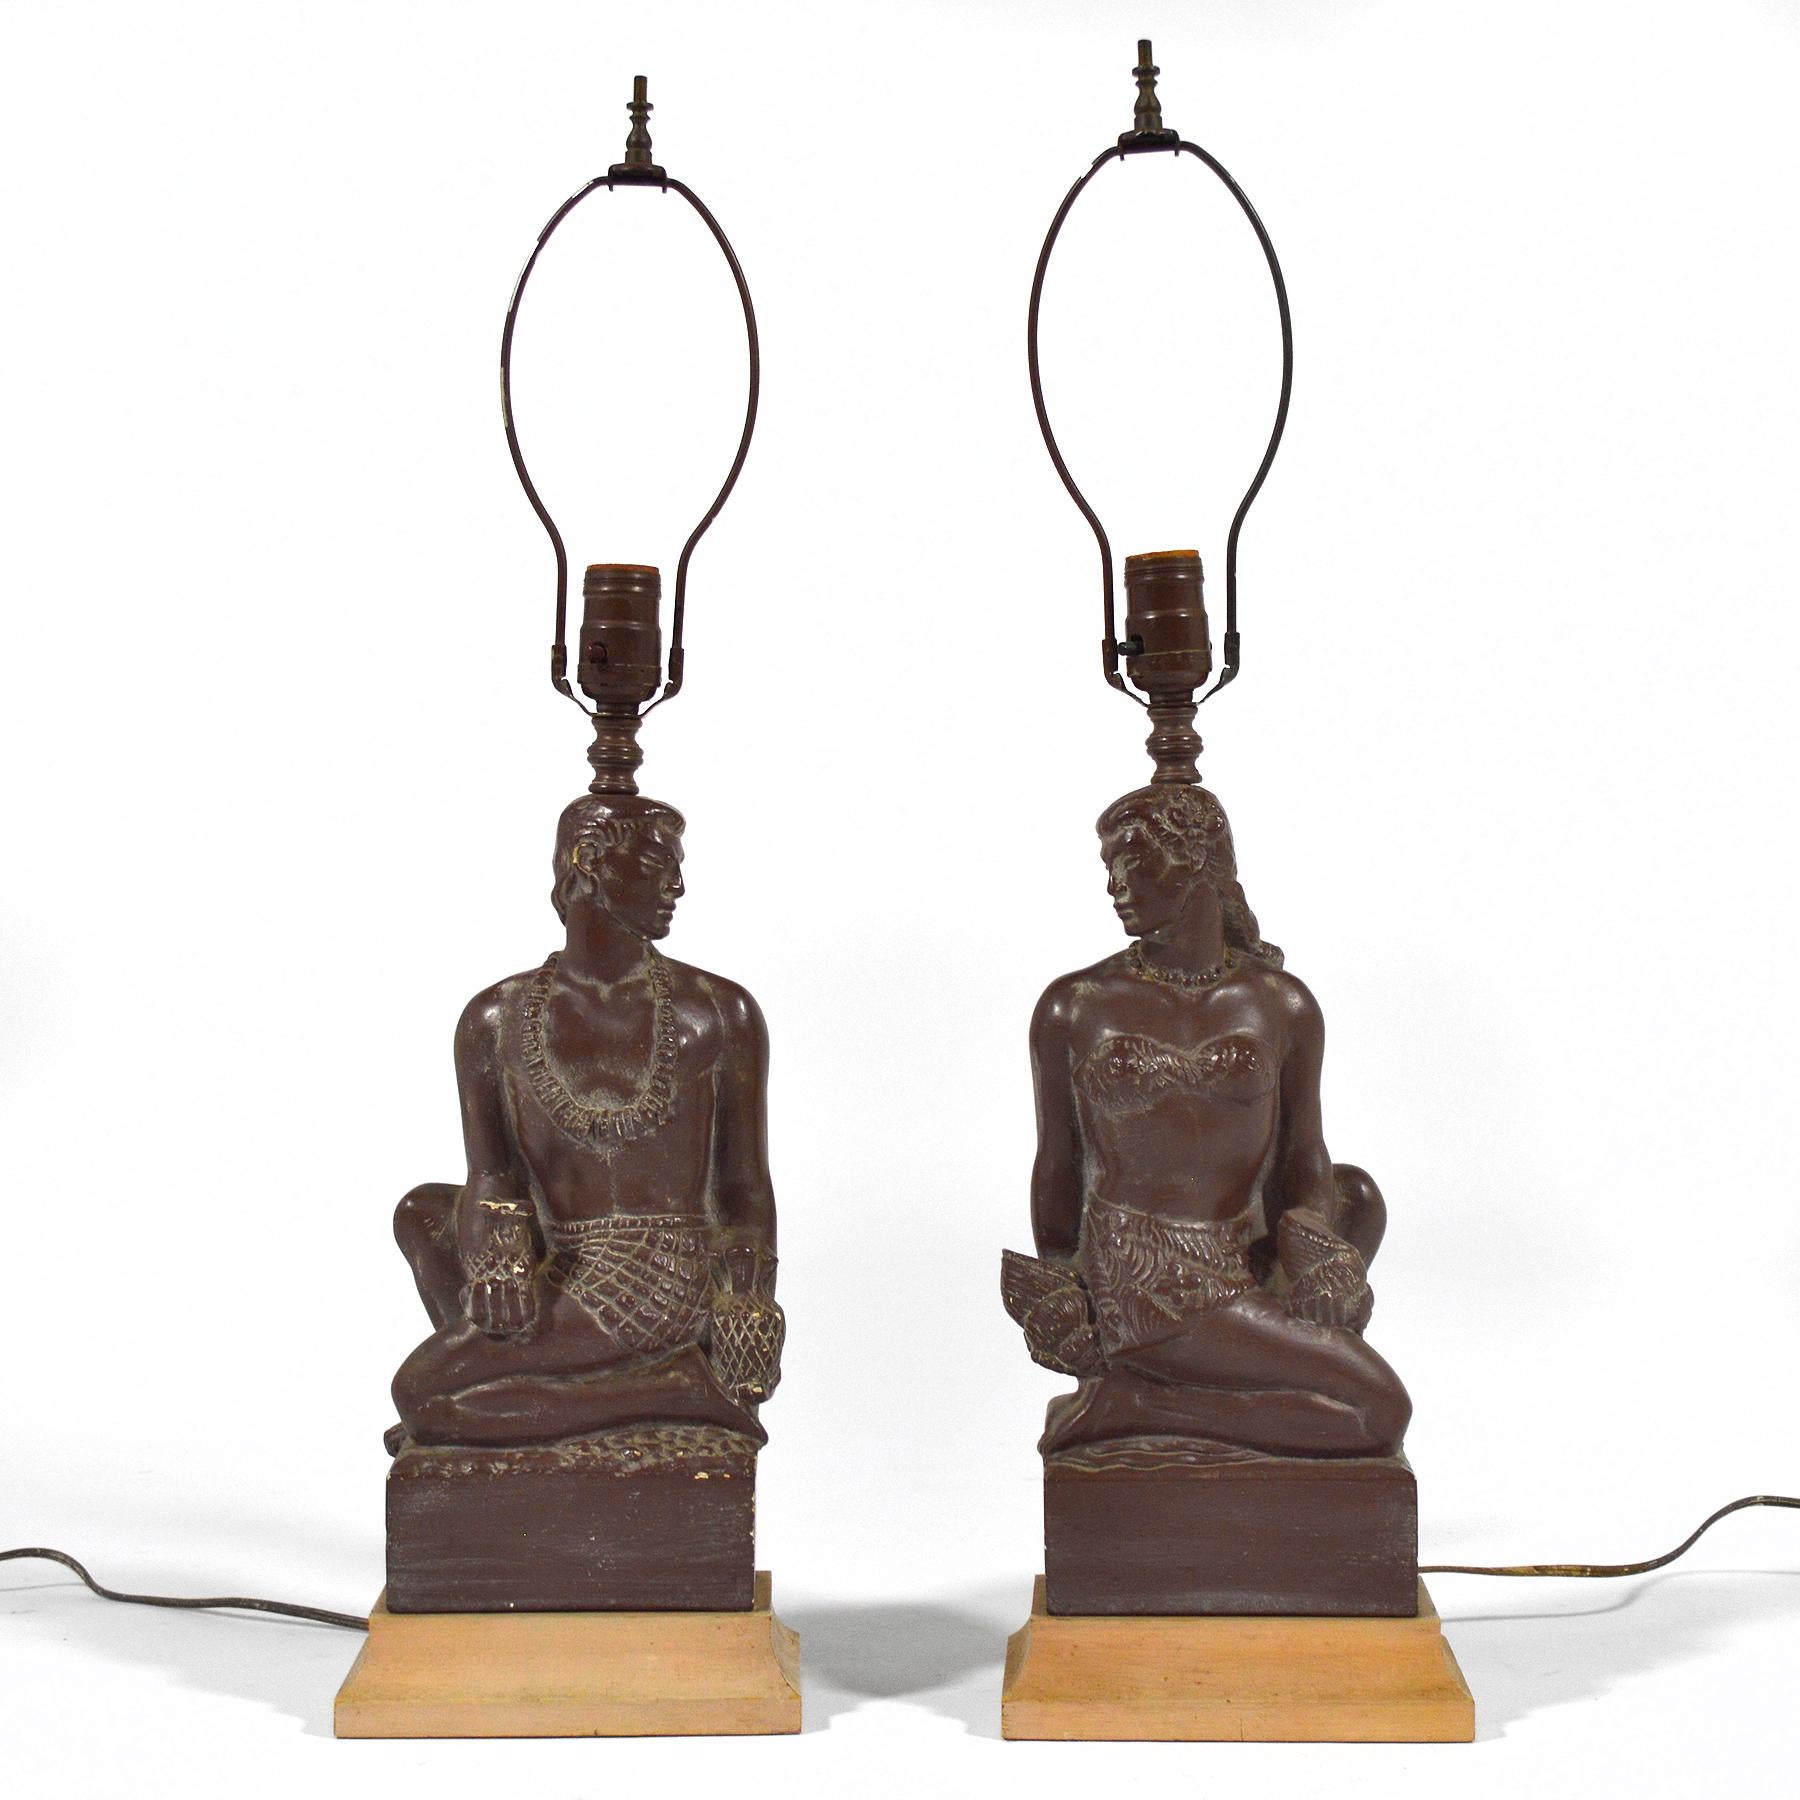 This fantastic pair of deco-inspired figural lamps feature a Hawaiian man and woman, are in good original condition, and have terrific style. The pair both wear leis and sarongs while the man holds a pair of pineapples and the woman has two shells.